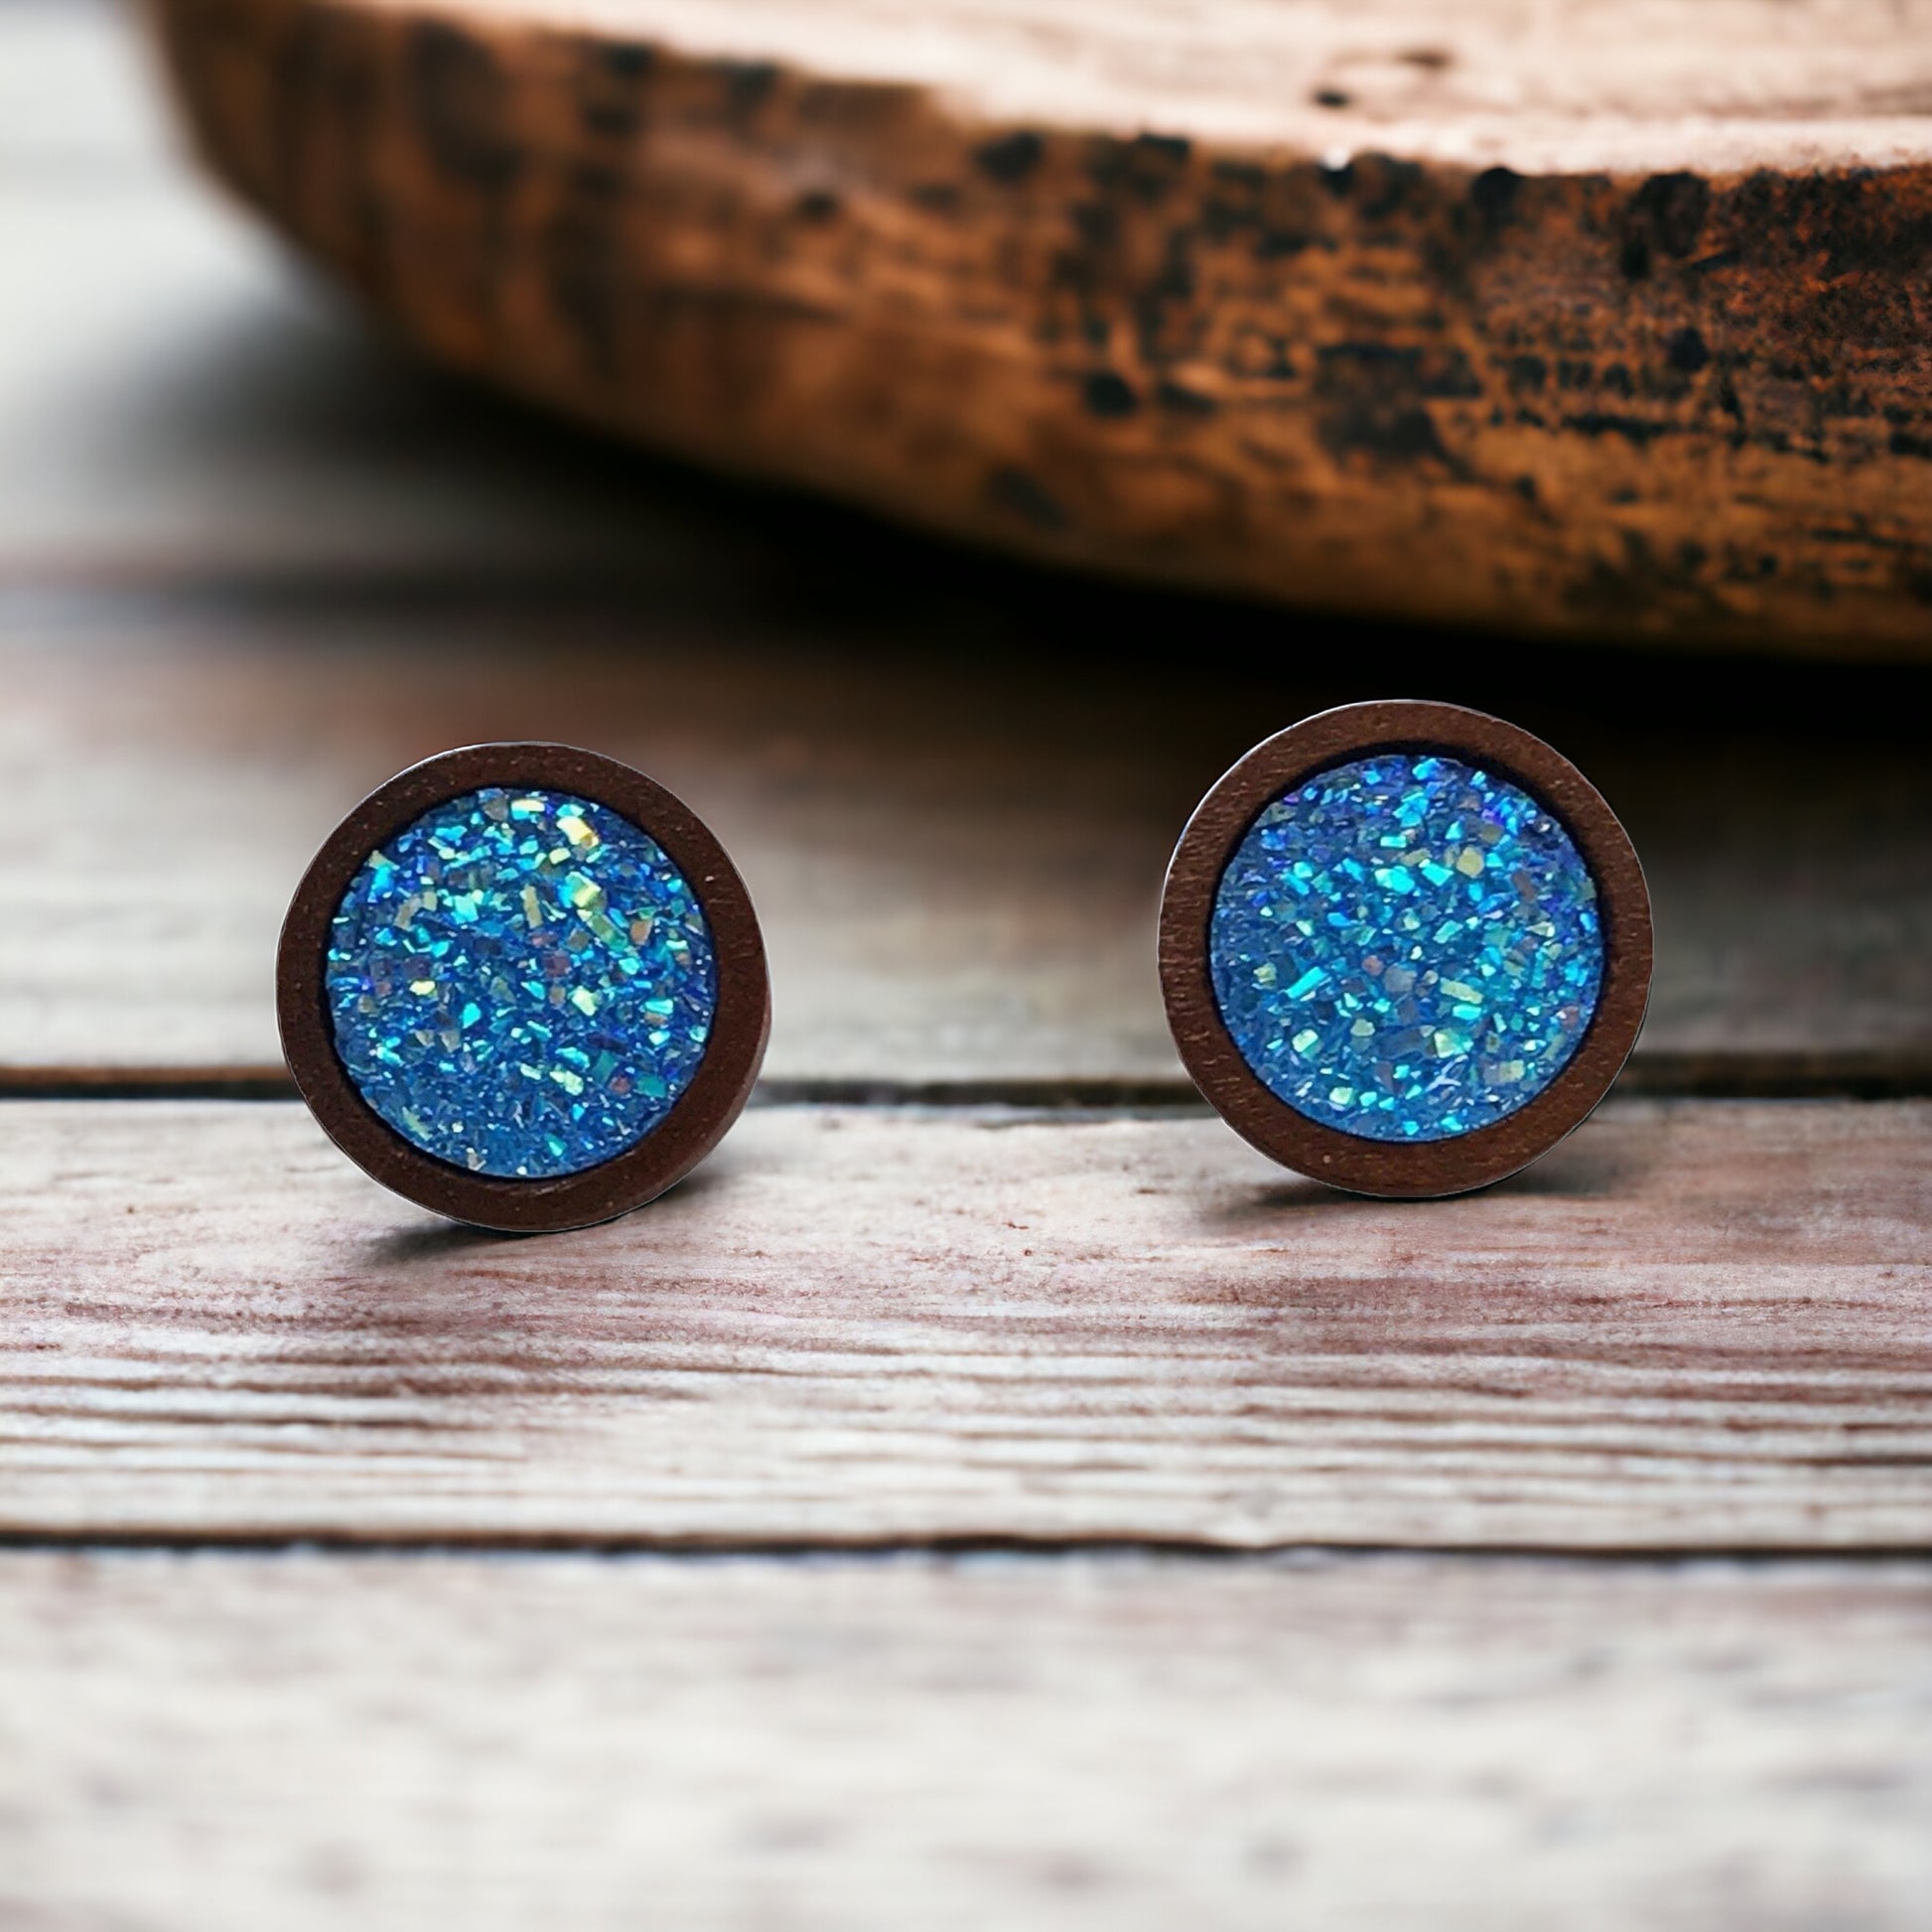 Blue Glitter Druzy Earrings - Boho Chic Studs with Natural Wood Accents